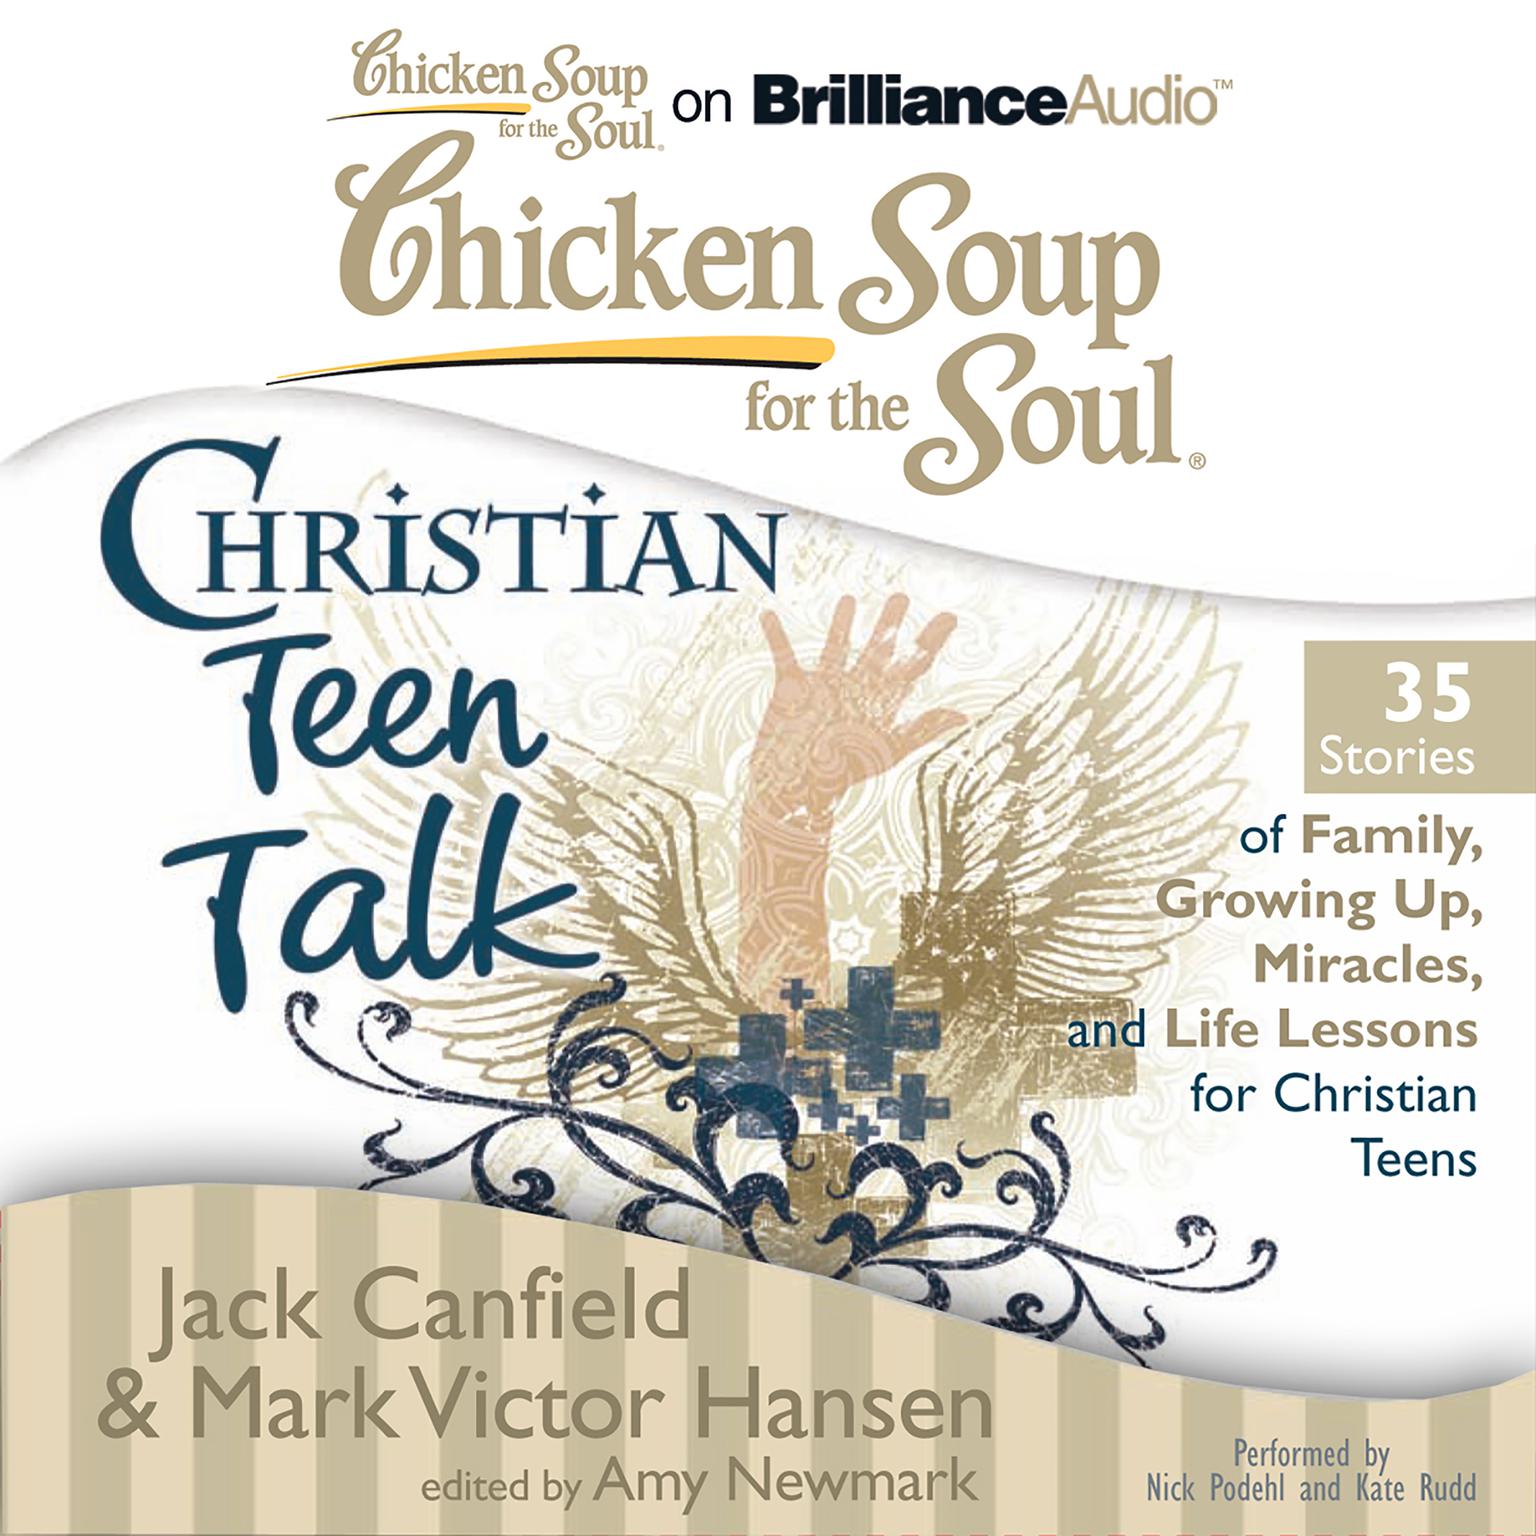 Chicken Soup for the Soul: Christian Teen Talk - 35 Stories of Family, Growing Up, Miracles, and Life Lessons for Christian Teens Audiobook, by Jack Canfield